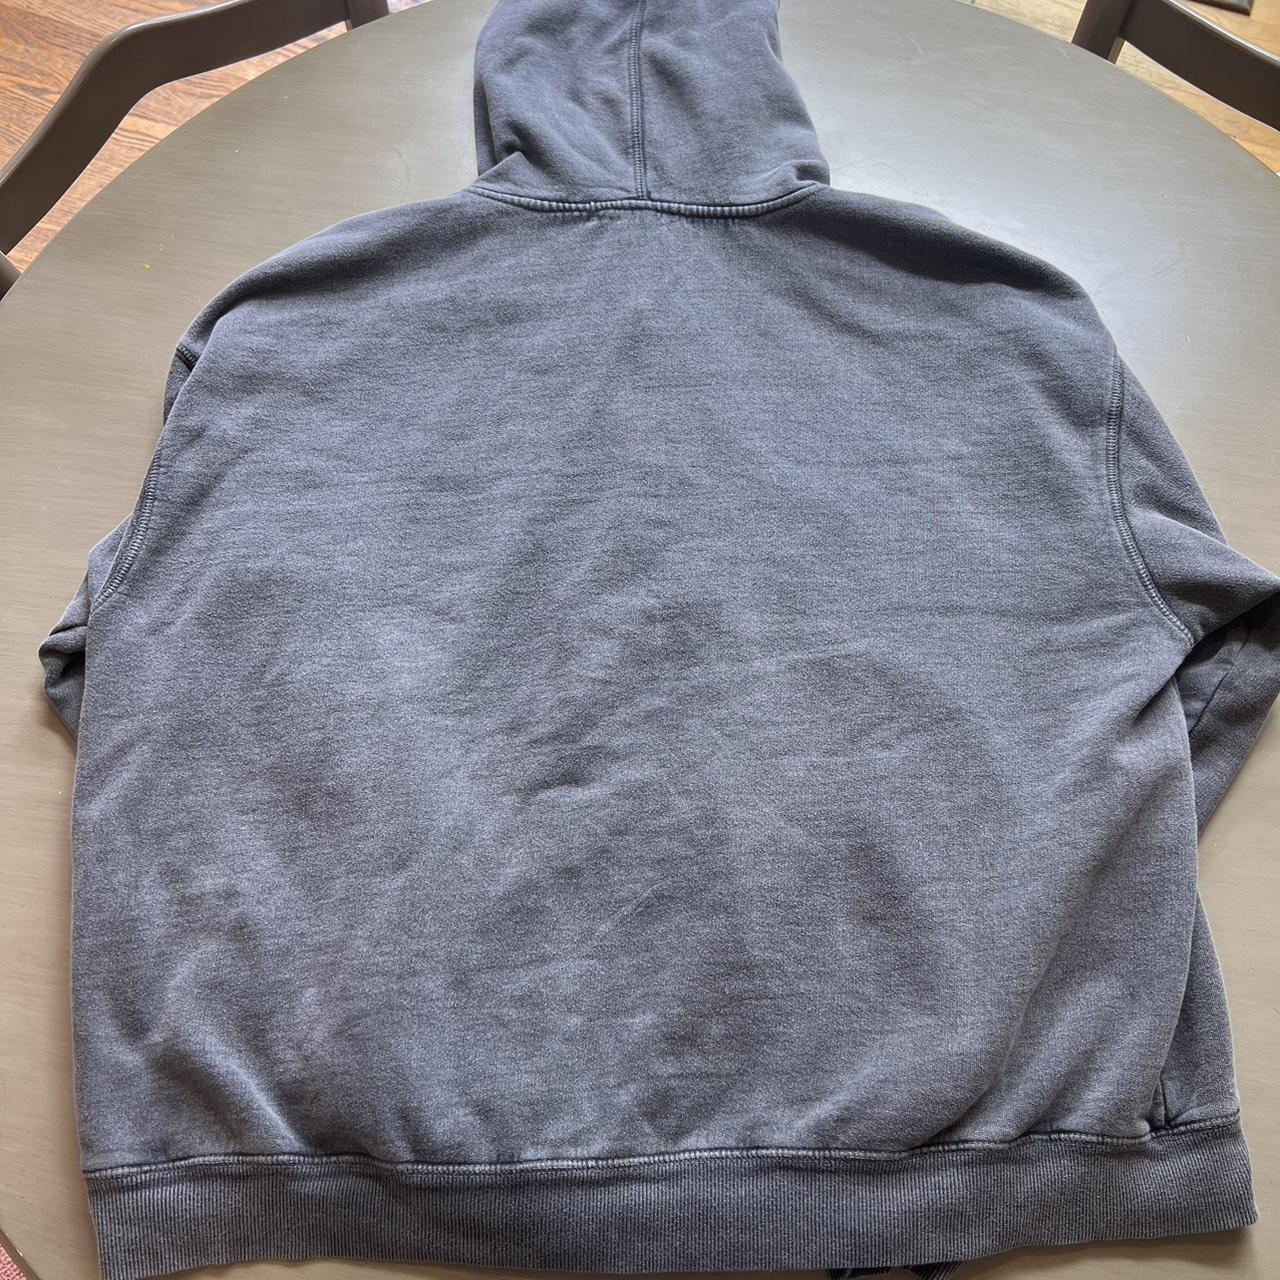 MNML zip up hoodie Size: XL FITS LIKE A LARGE - Depop